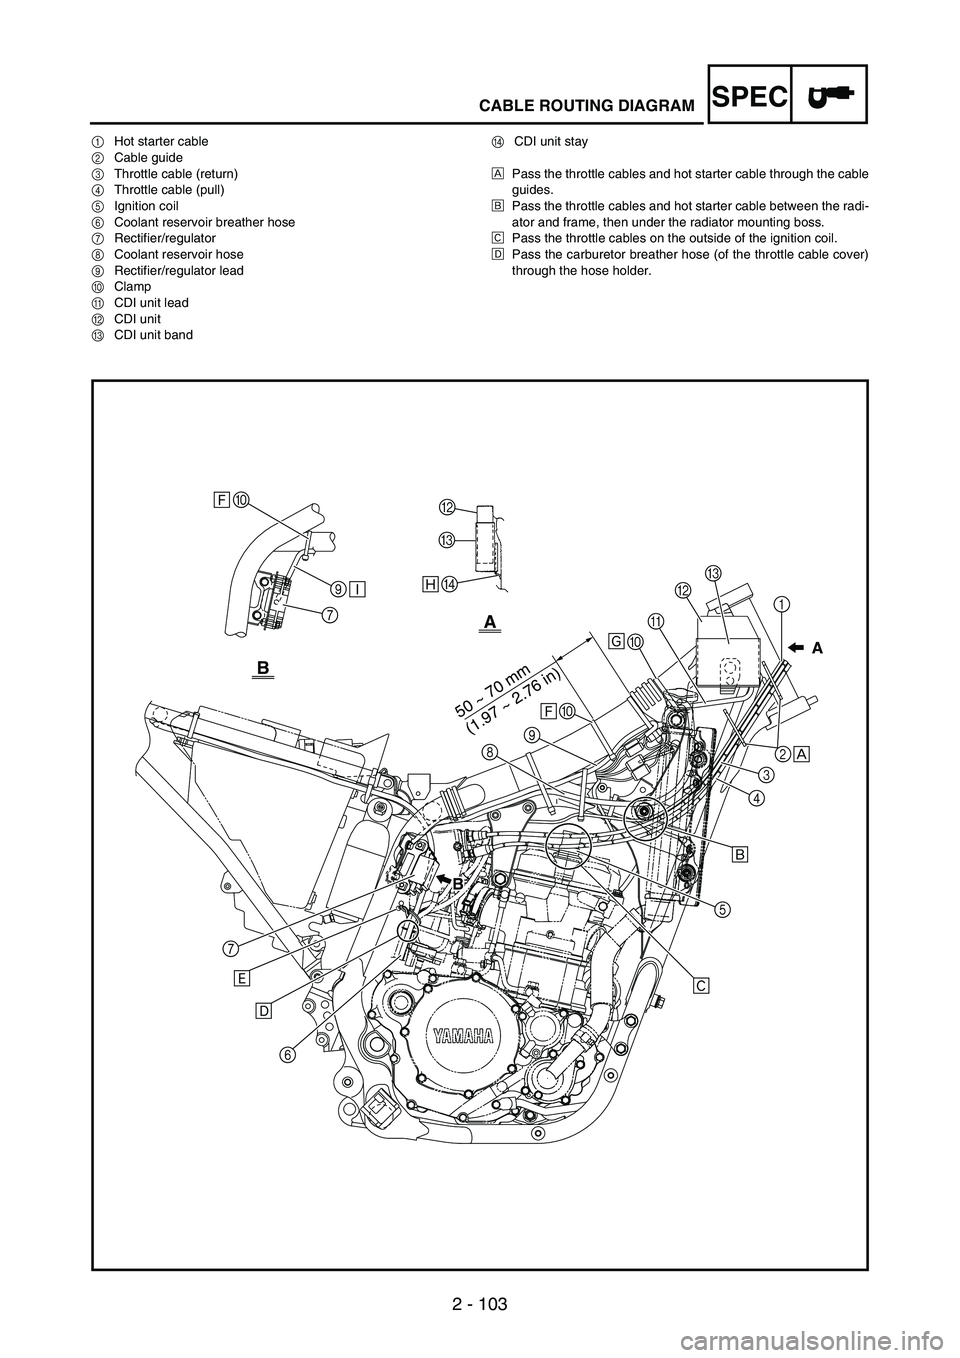 YAMAHA WR 250F 2004  Manuale de Empleo (in Spanish) SPEC
2 - 103
CABLE ROUTING DIAGRAM
1Hot starter cable
2Cable guide
3Throttle cable (return)
4Throttle cable (pull)
5Ignition coil
6Coolant reservoir breather hose
7Rectifier/regulator
8Coolant reservo